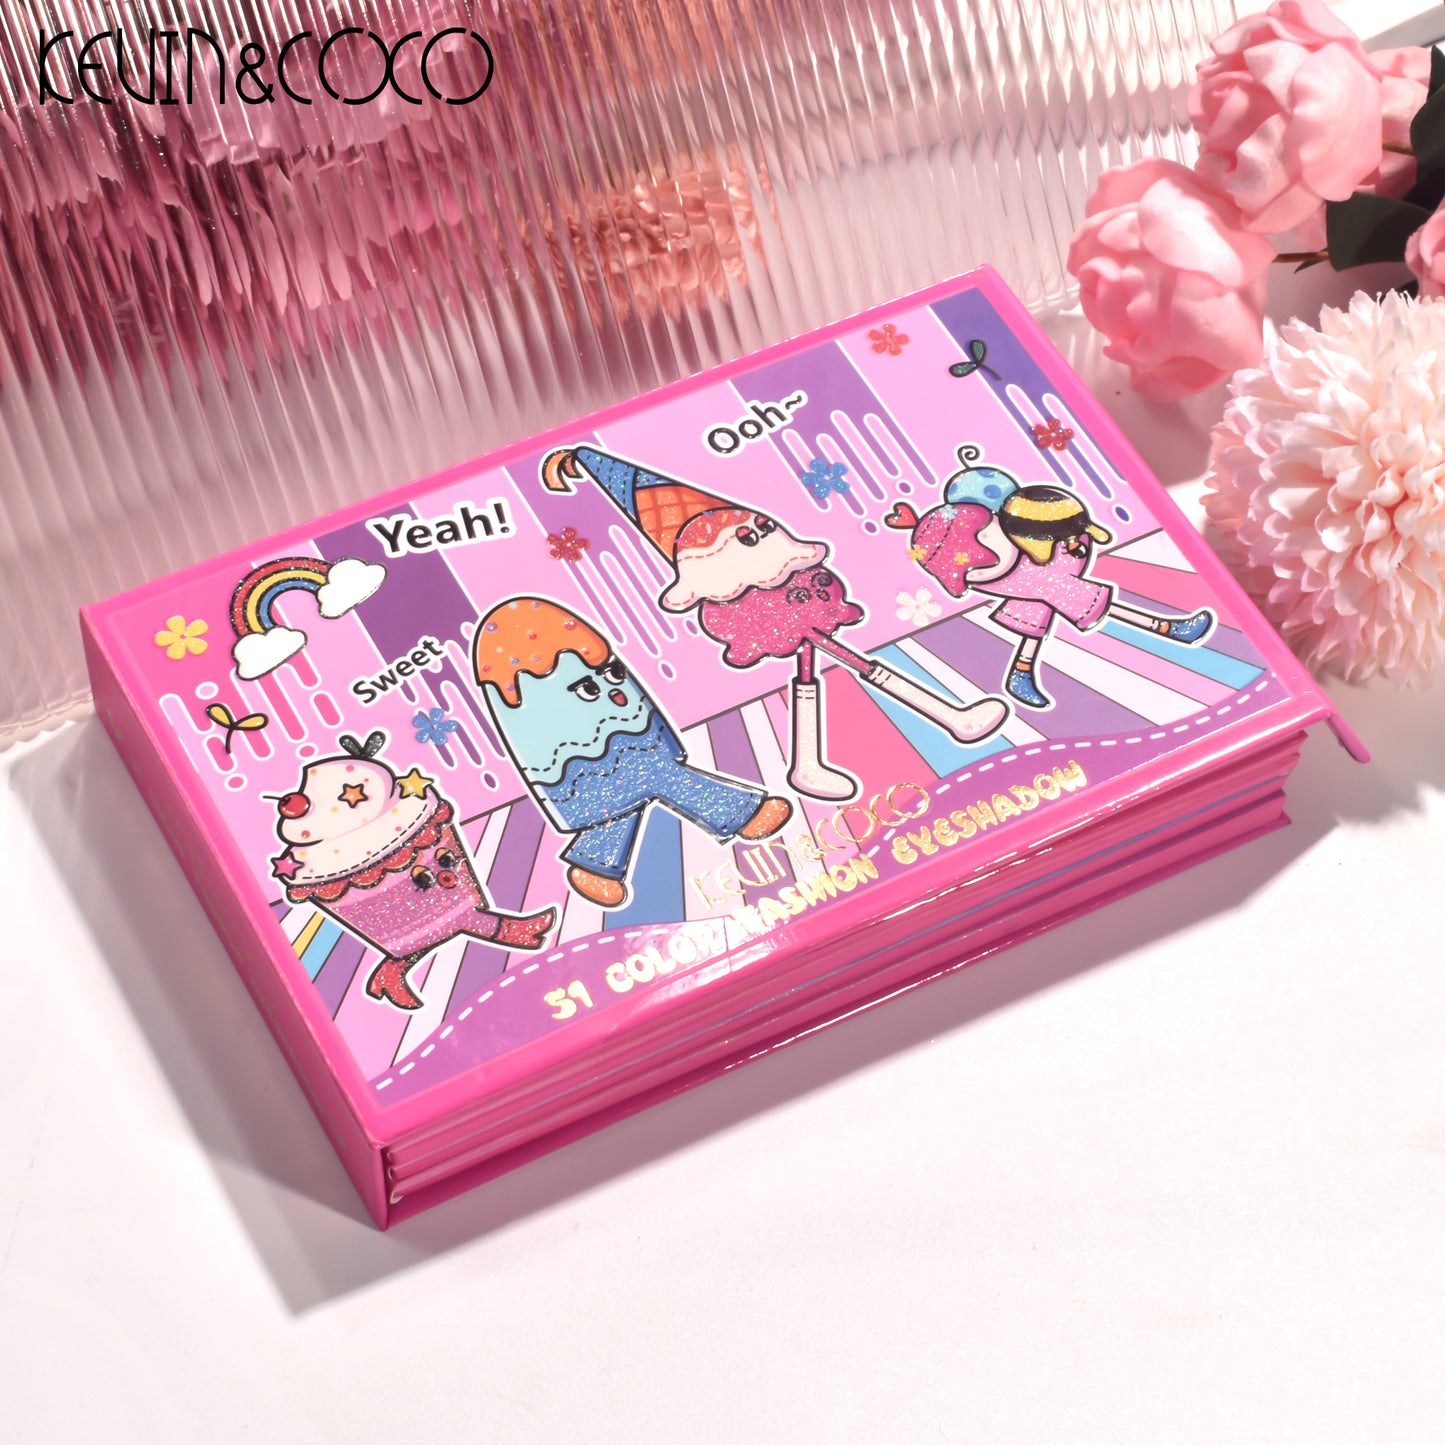 KEVIN & COCO - 51 Colors Rotatable Colorful Piano Key Ice Cream Eyeshadow Palette